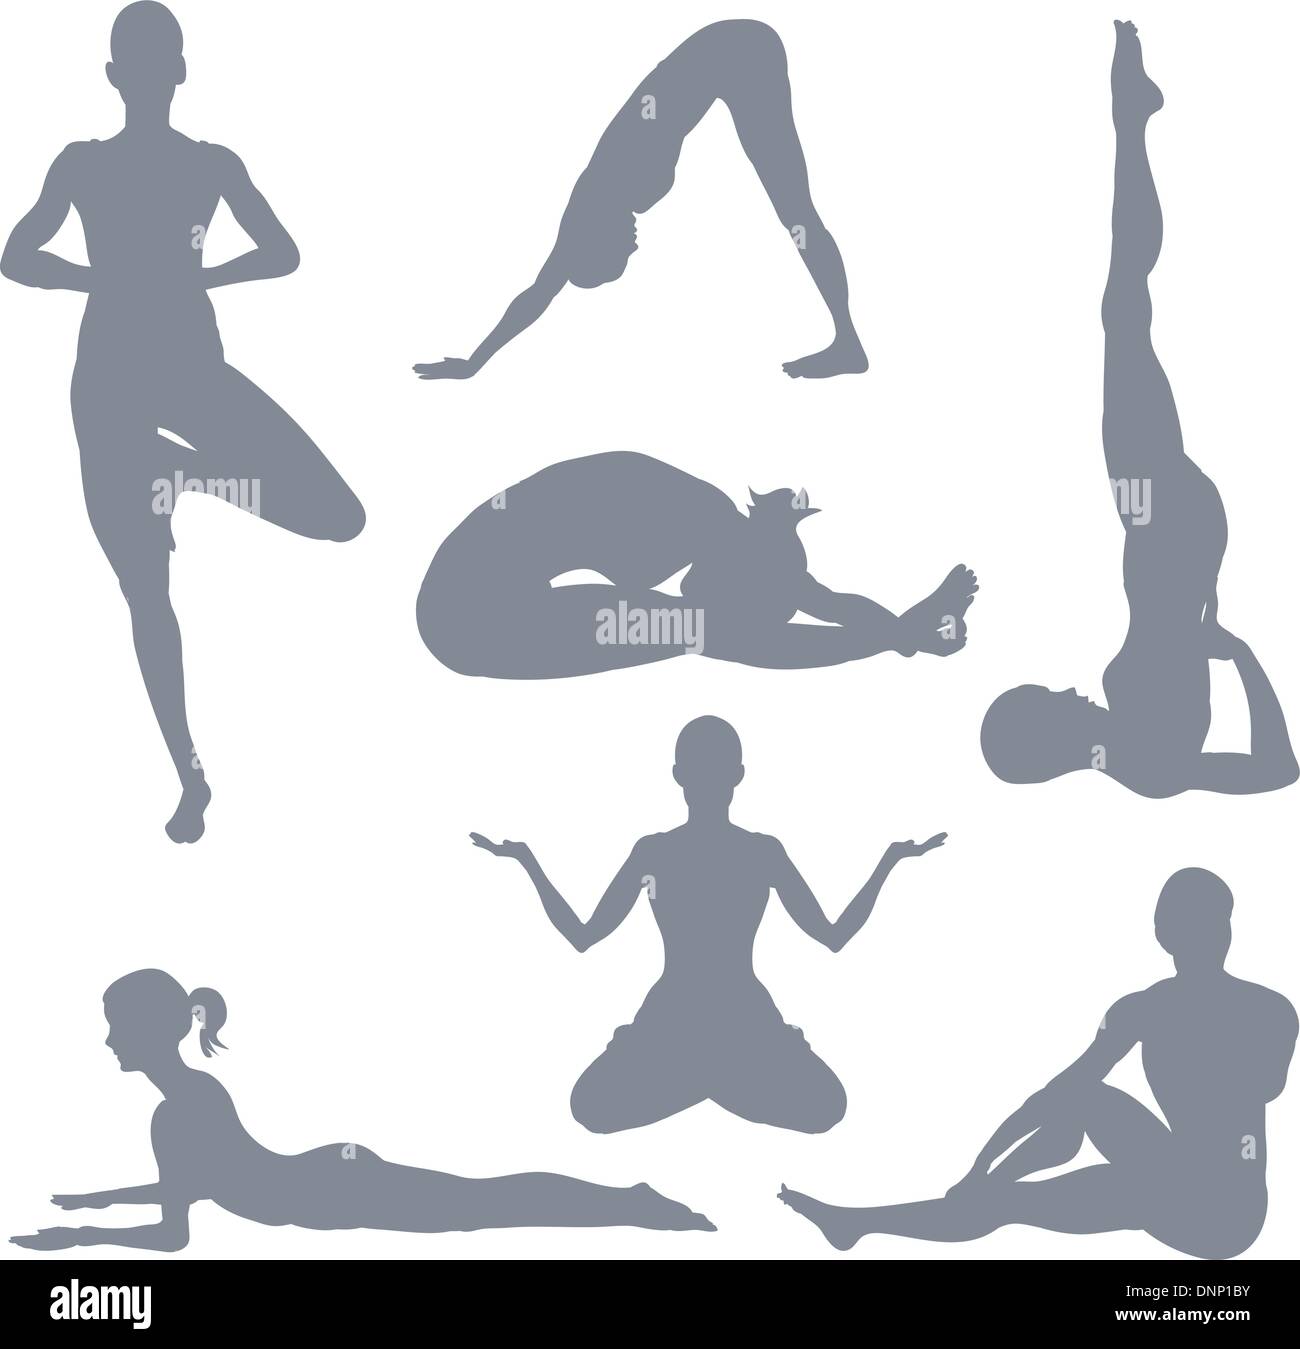 Yoga postures. A set of yoga postures silhouettes. Stock Vector